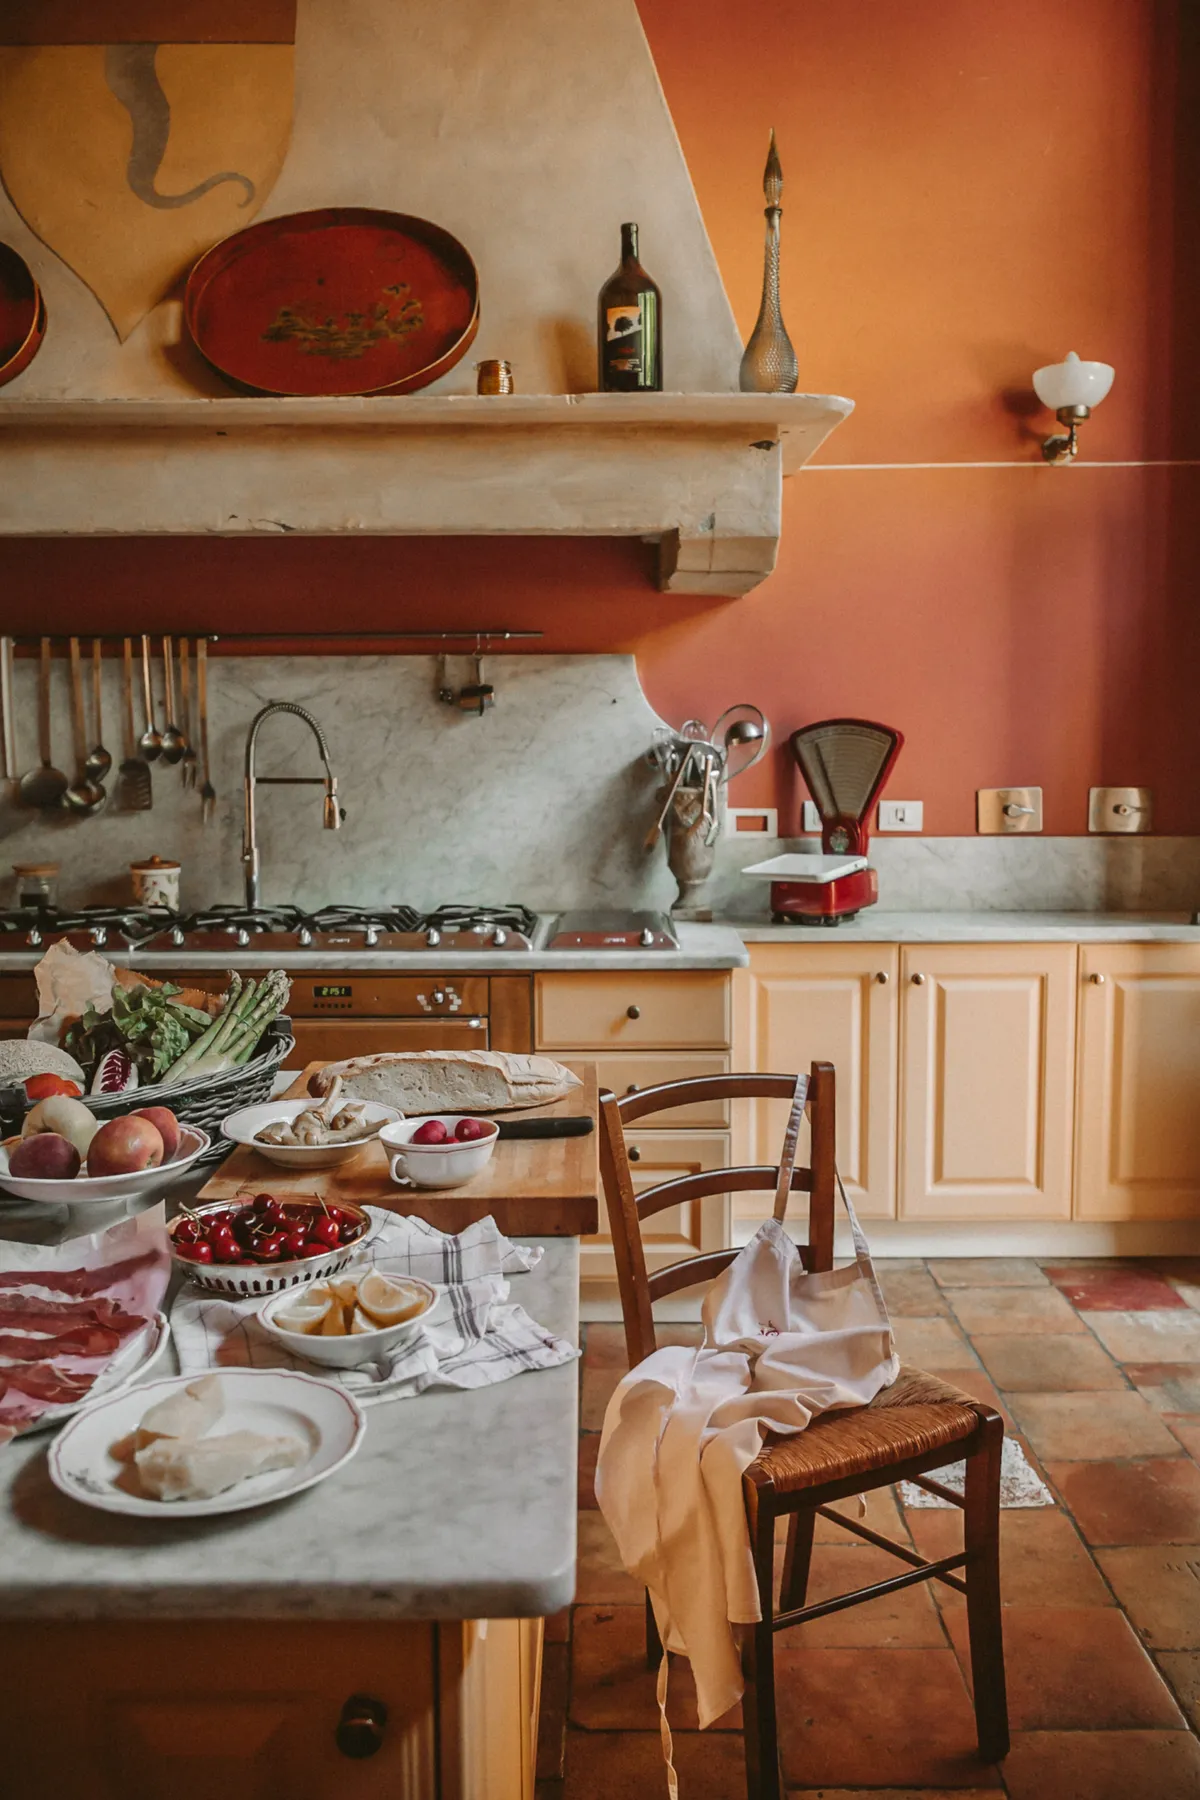 How To Achieve This Rustic Italian Look